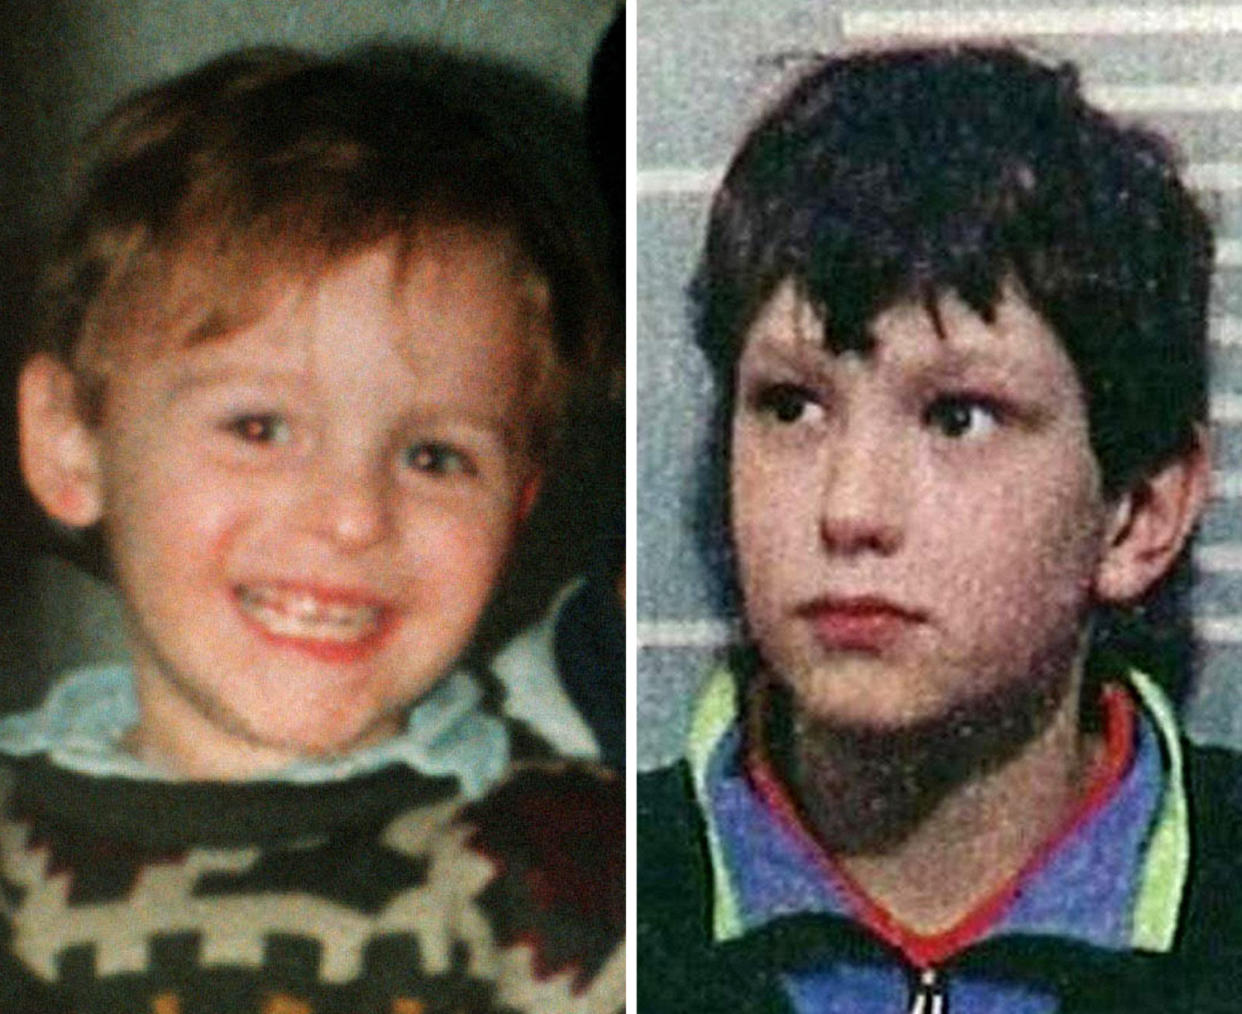 James Bulger (left) and one of his murderers Jon Venables. (PA)